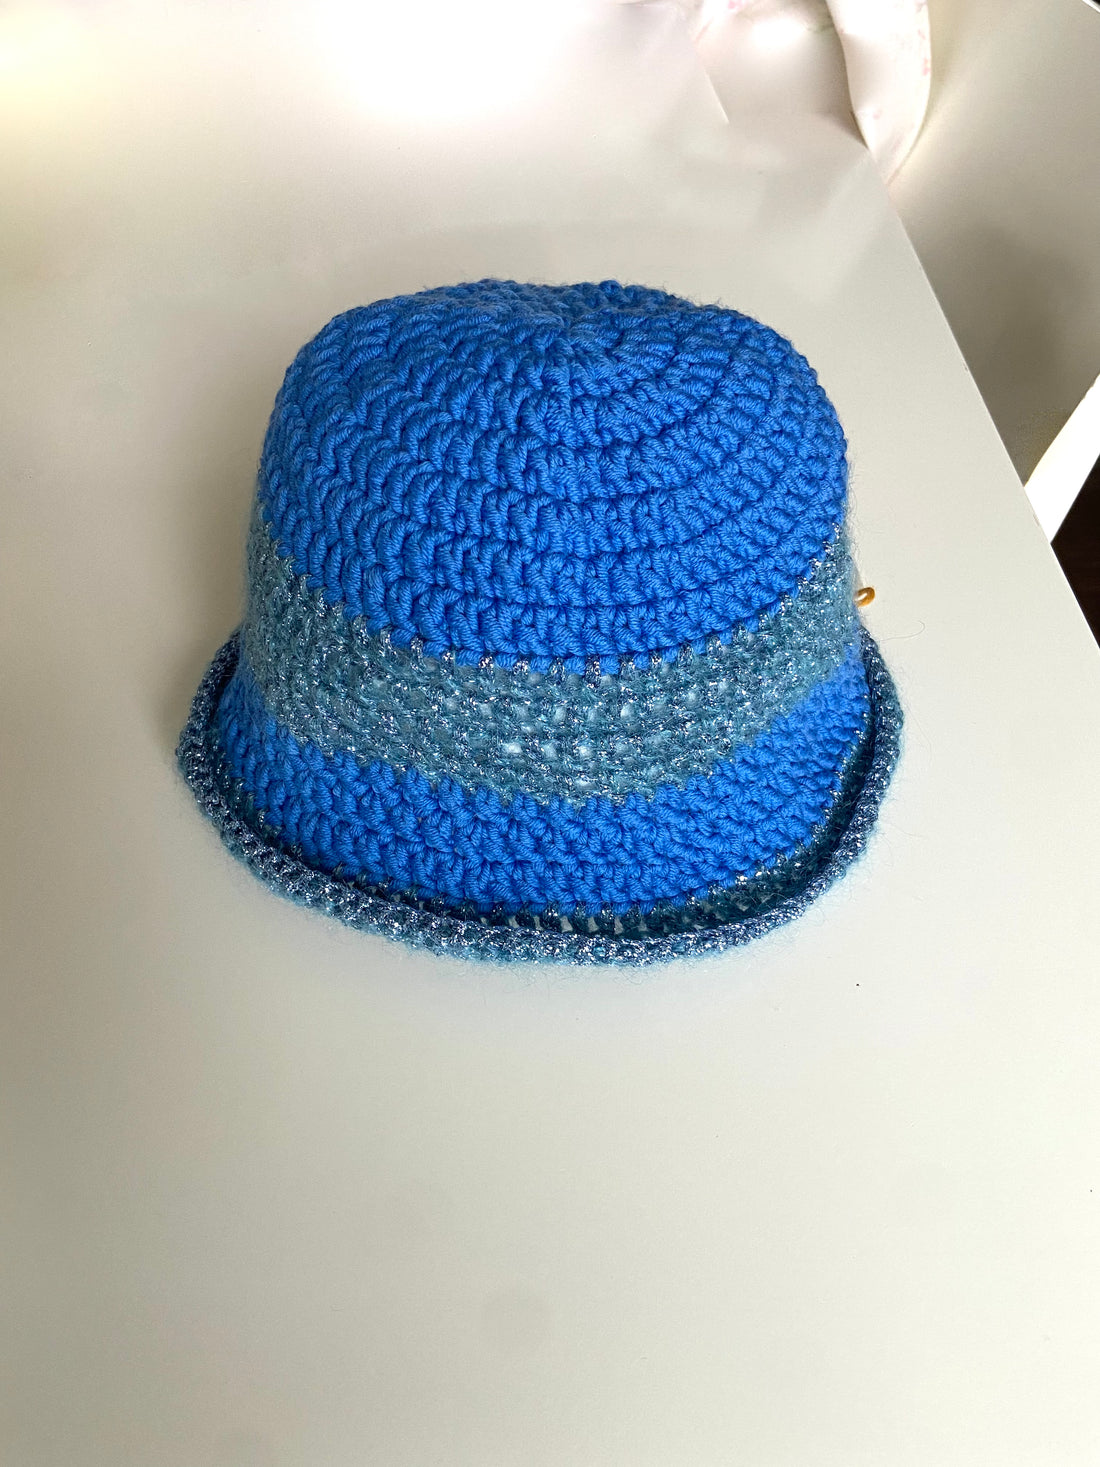 anabaum hat wooly made of merino wool in shades of blue with some matching metallic yarn for added bedazzle!